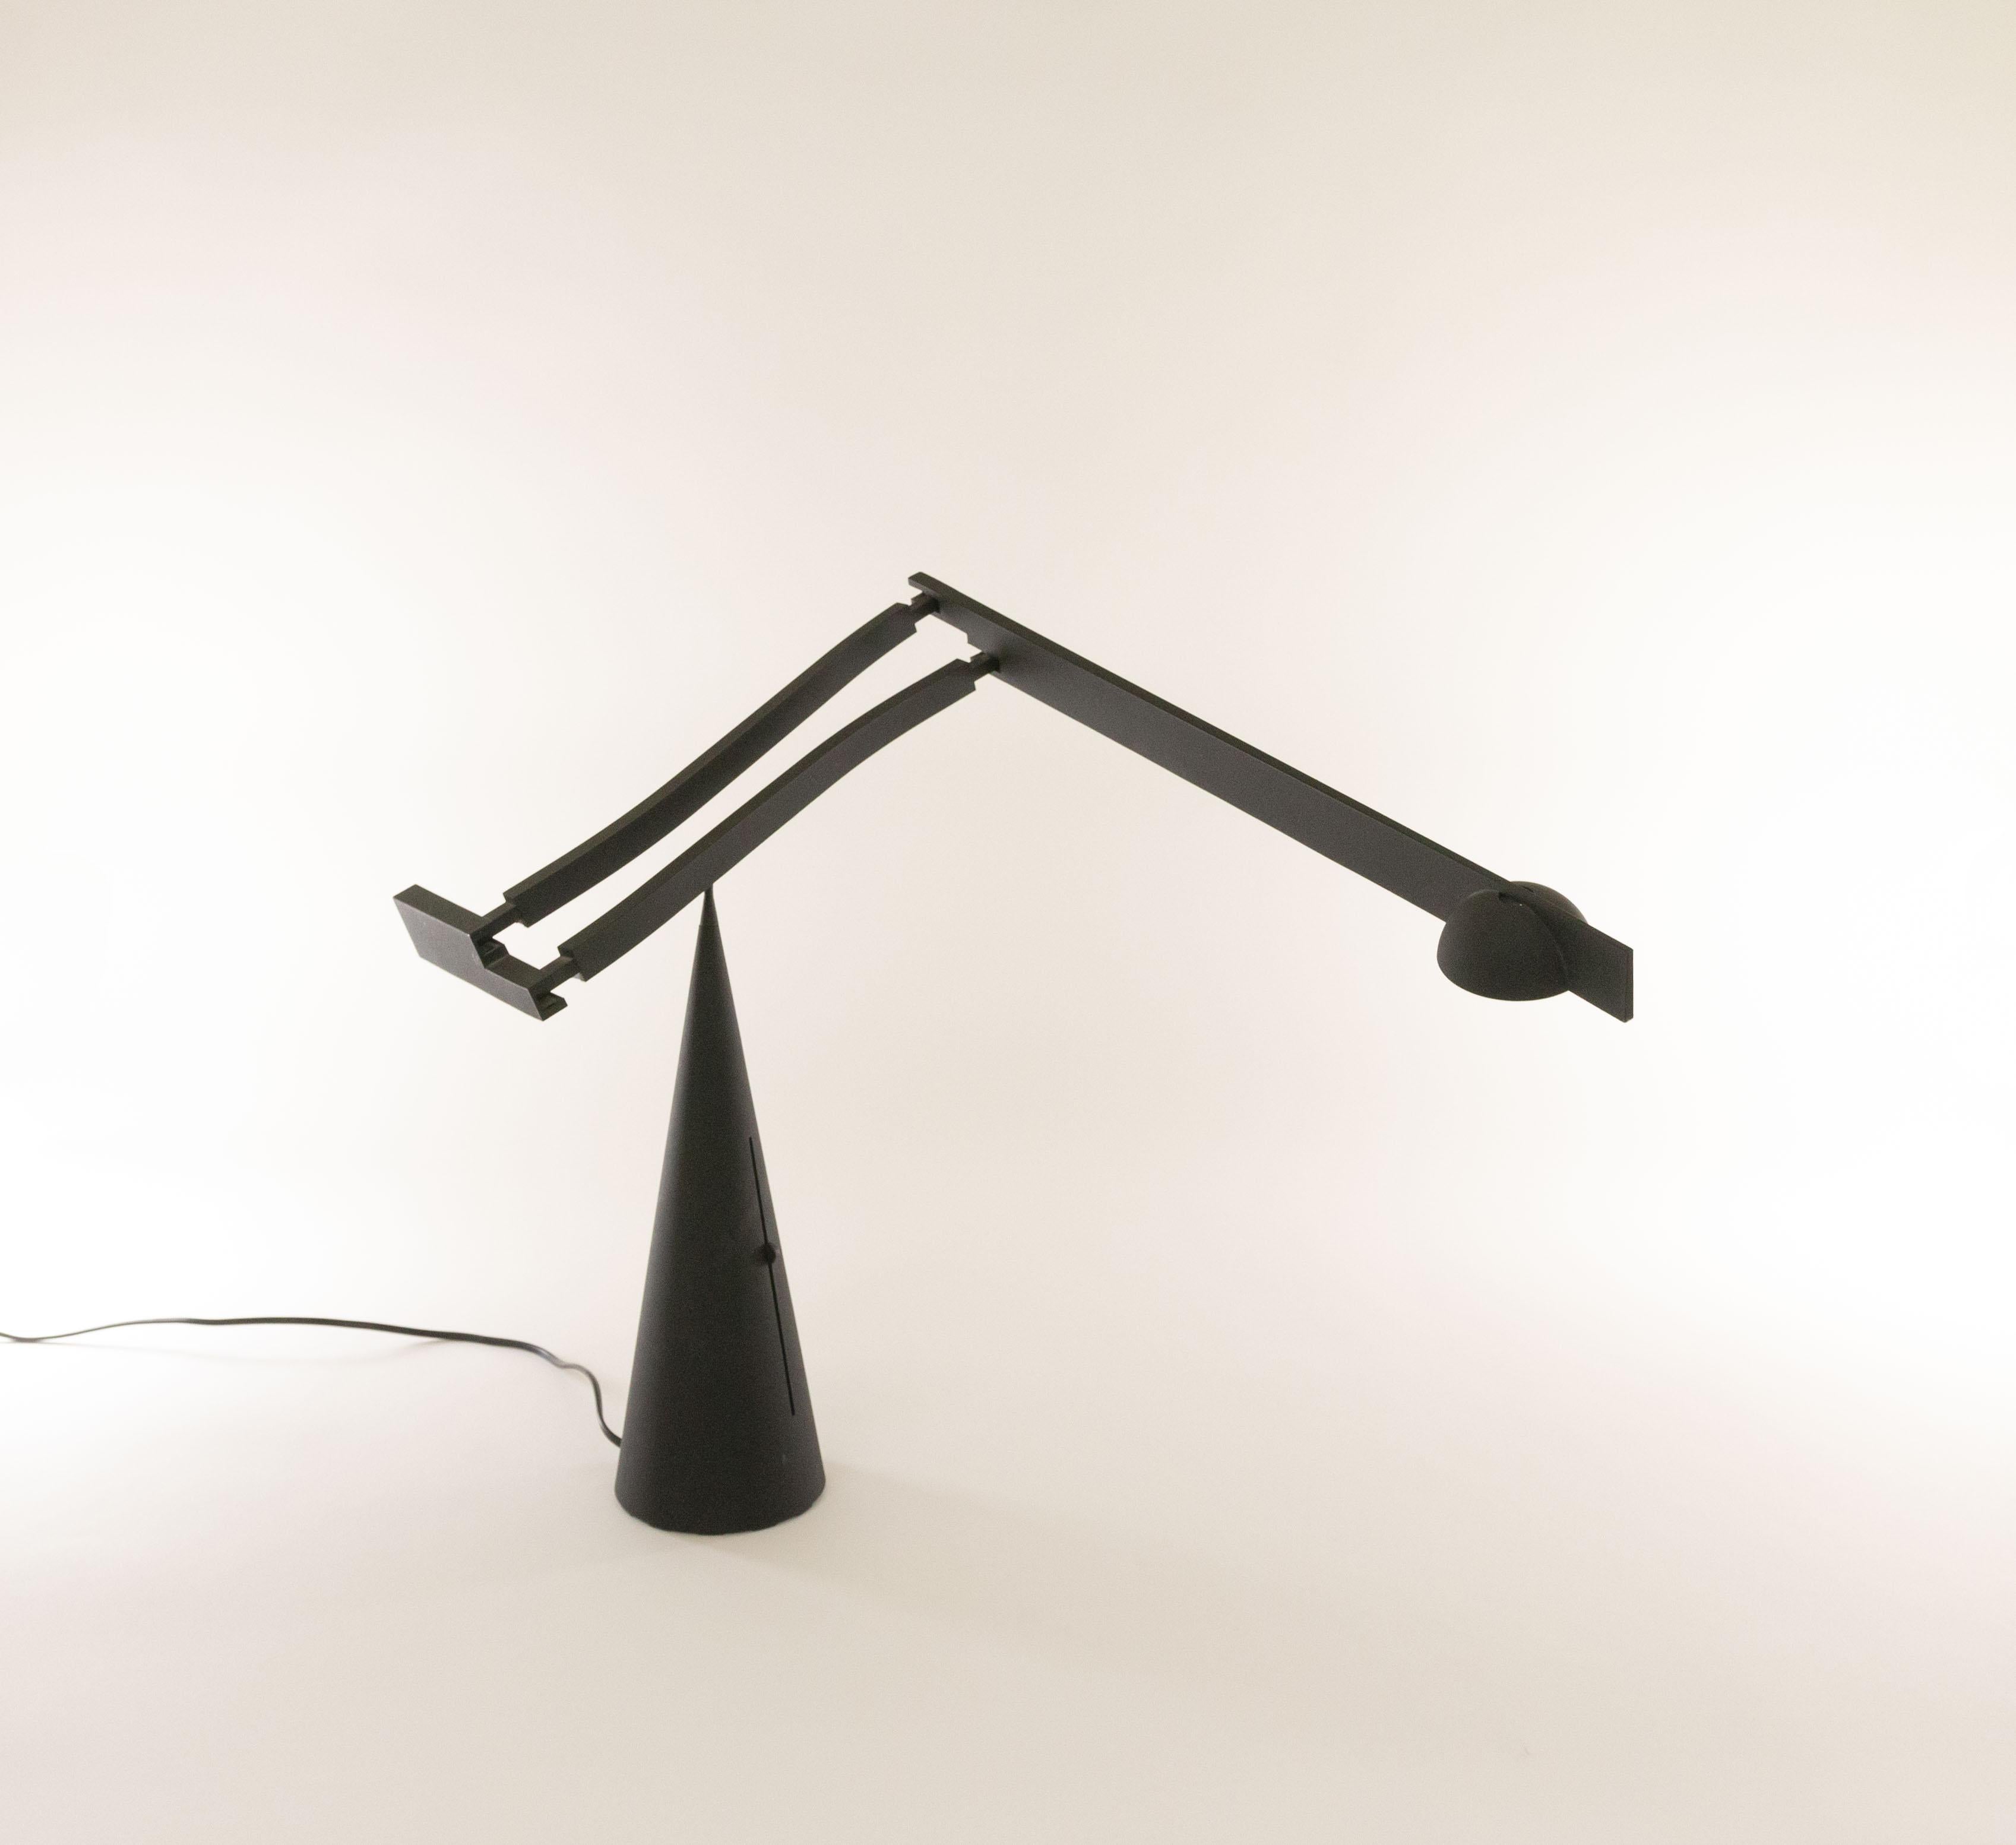 Tabla table lamp by Mario Barbaglia and Marco Colombo for Italiana Luce, 1988 - 1990.

Exceptional sculptural design with an adjustable and extendable arm that gracefully pivots on the peak of the cone base. The transformer of this halogen lamp